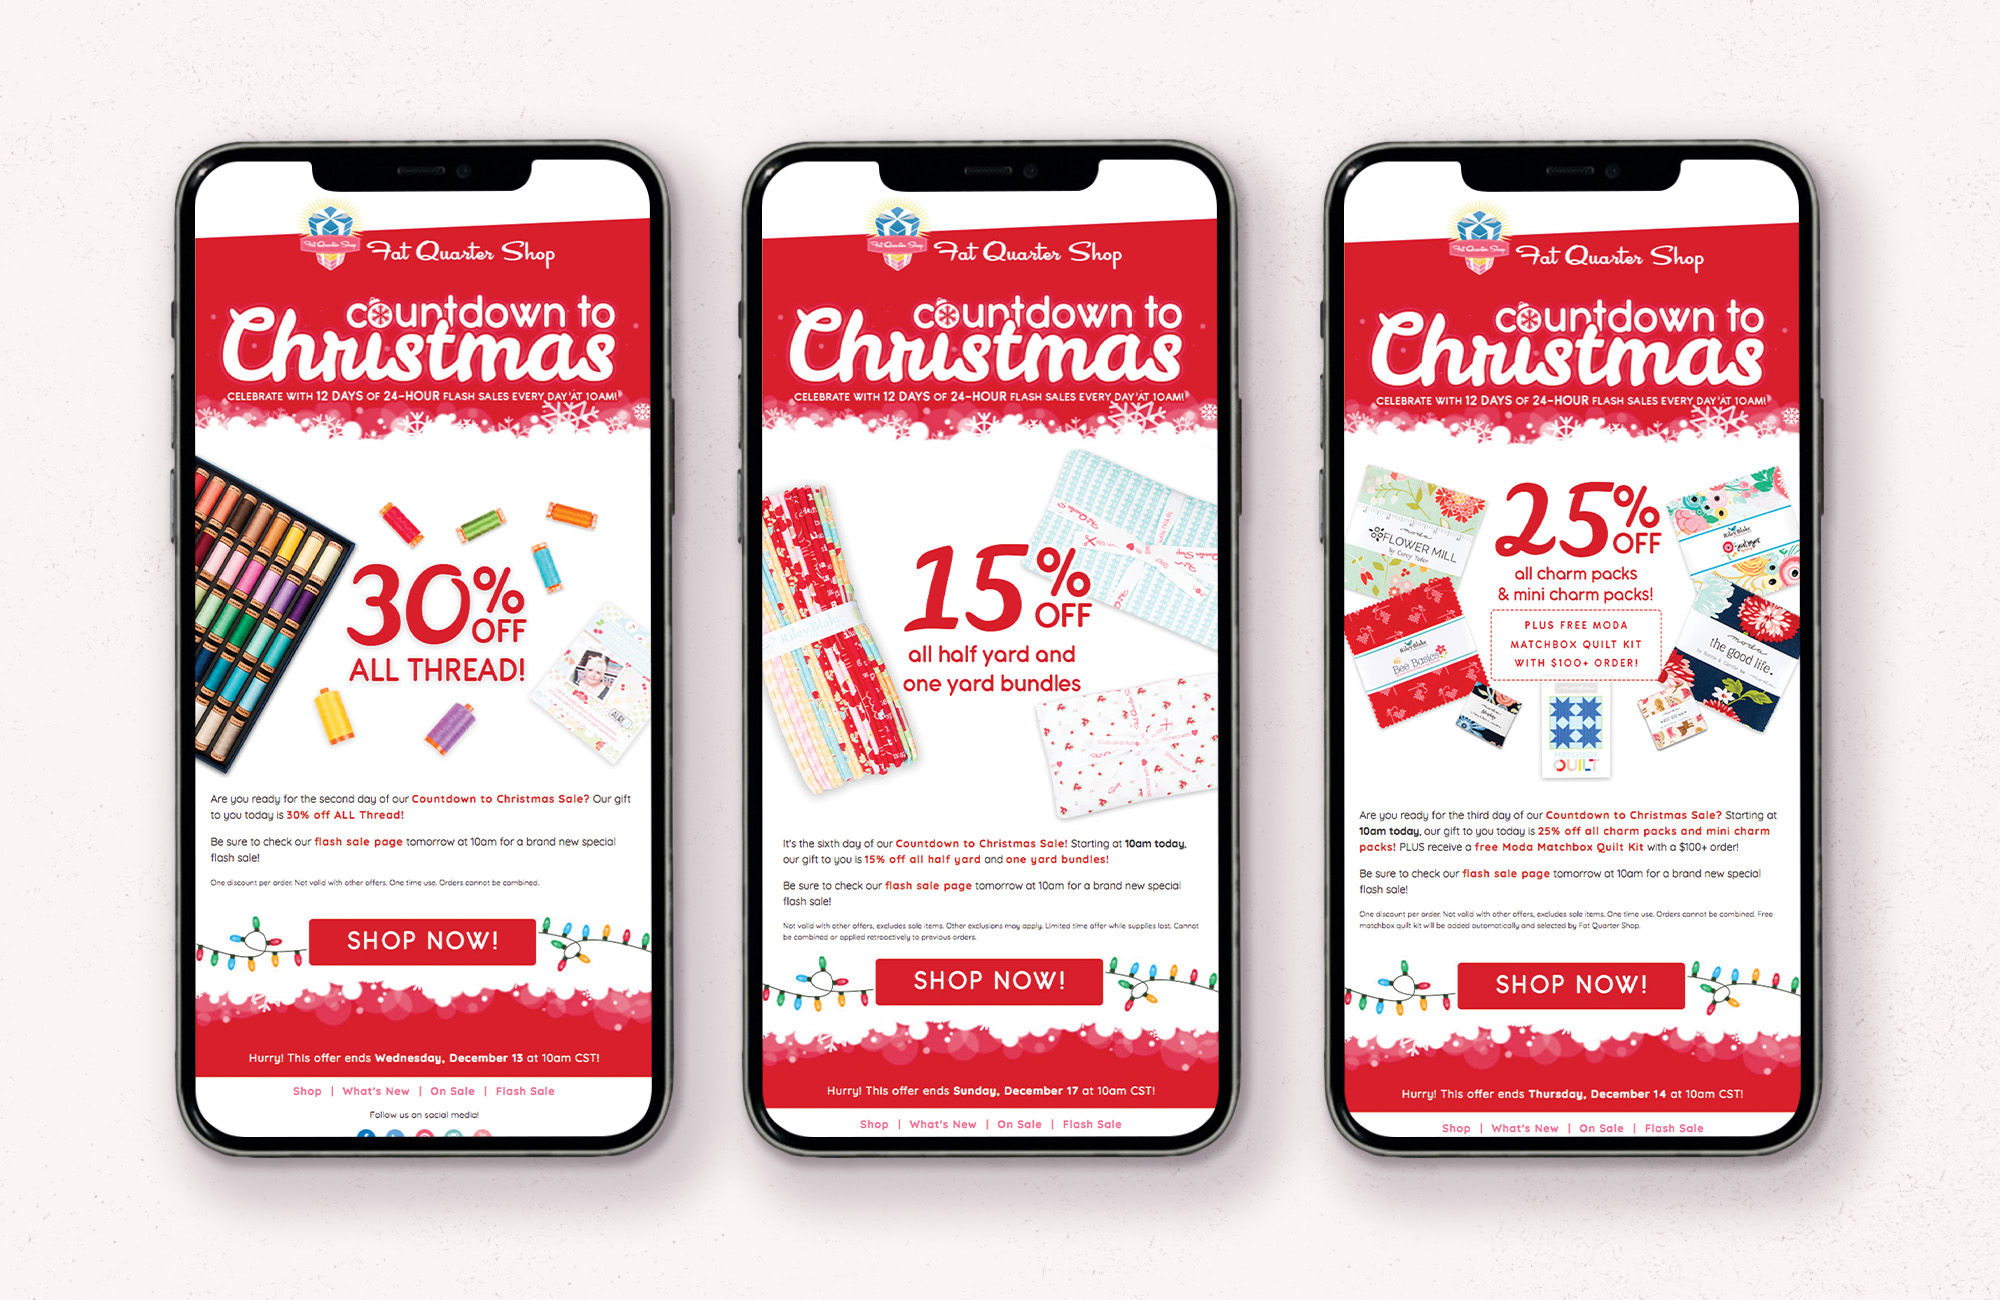 Three phones sit on a light background. Each phone displays a different email in a series of marketing emails titled Countdown to Christmas. From left to right the featured sales in each email is 30 percent off thread, 15 percent off half yard and yard bundles, and 25 percent off charm packs.